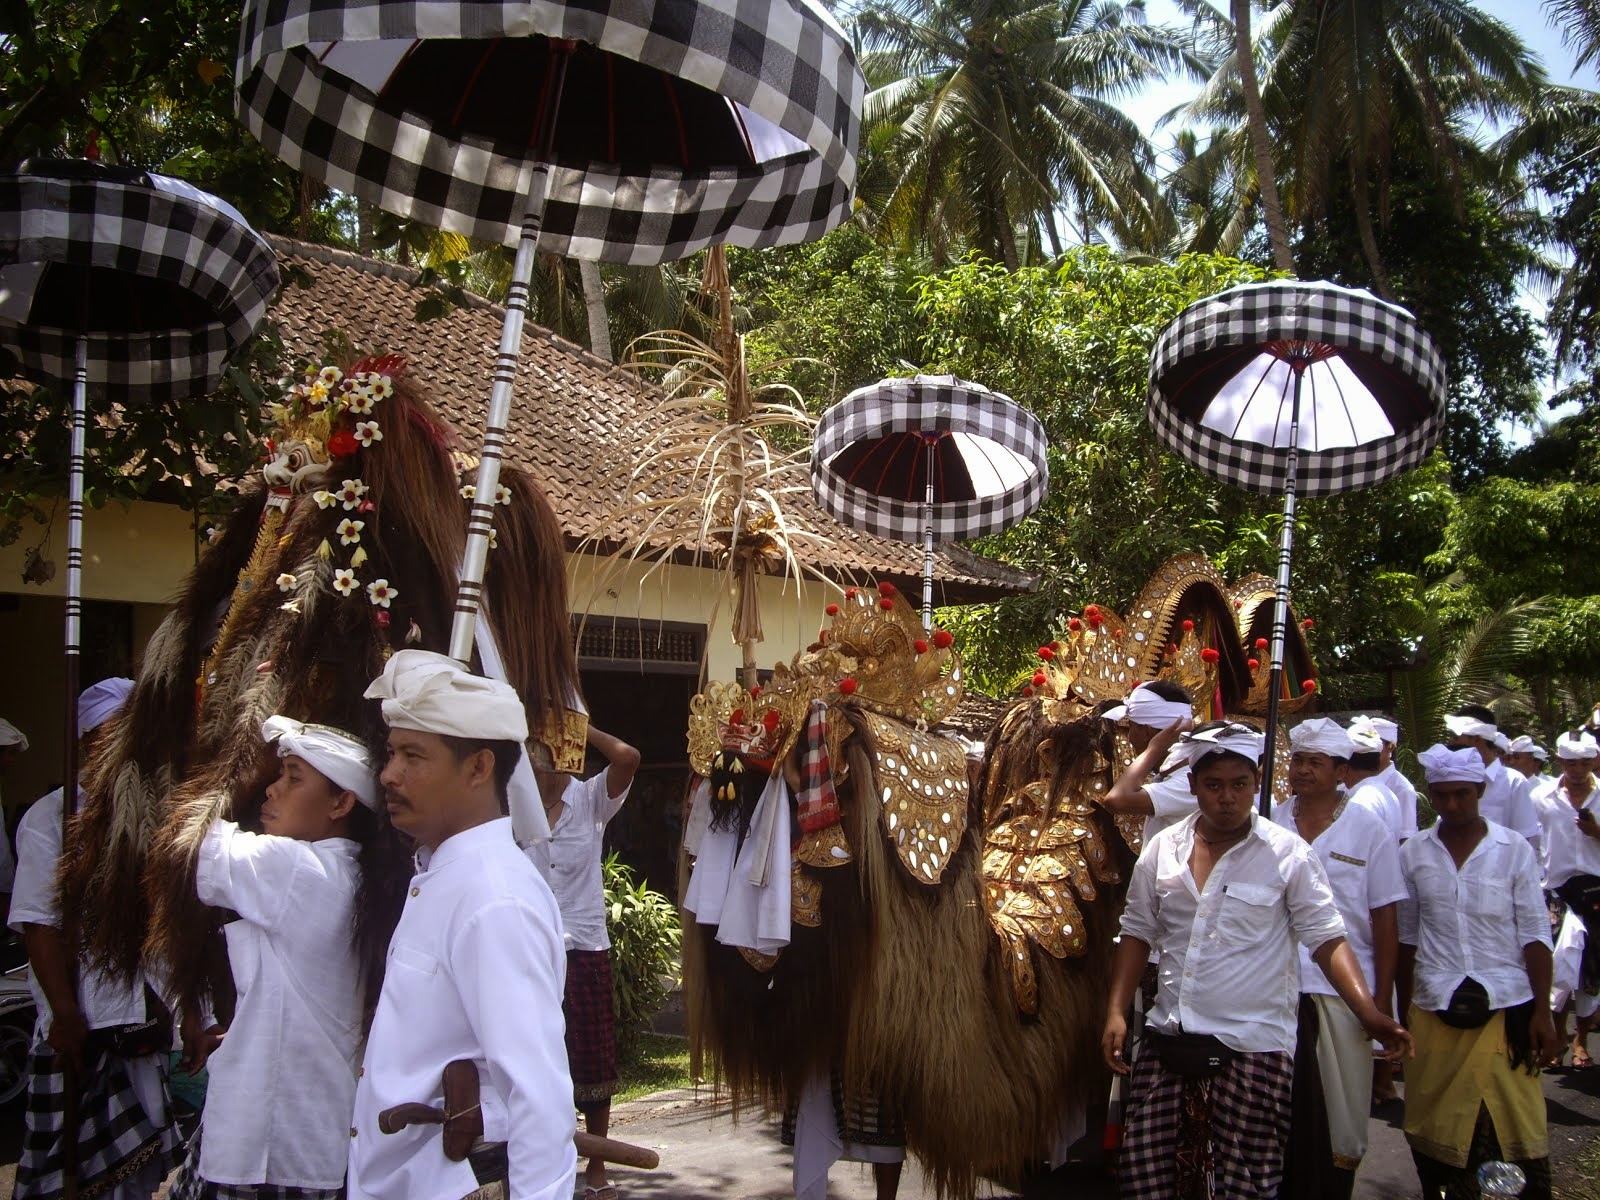 BALINESE CEREMONY. THE MEN PARADE THE SACRED BARONG THROUGH THE VILLAGE AND RICE FIELDS